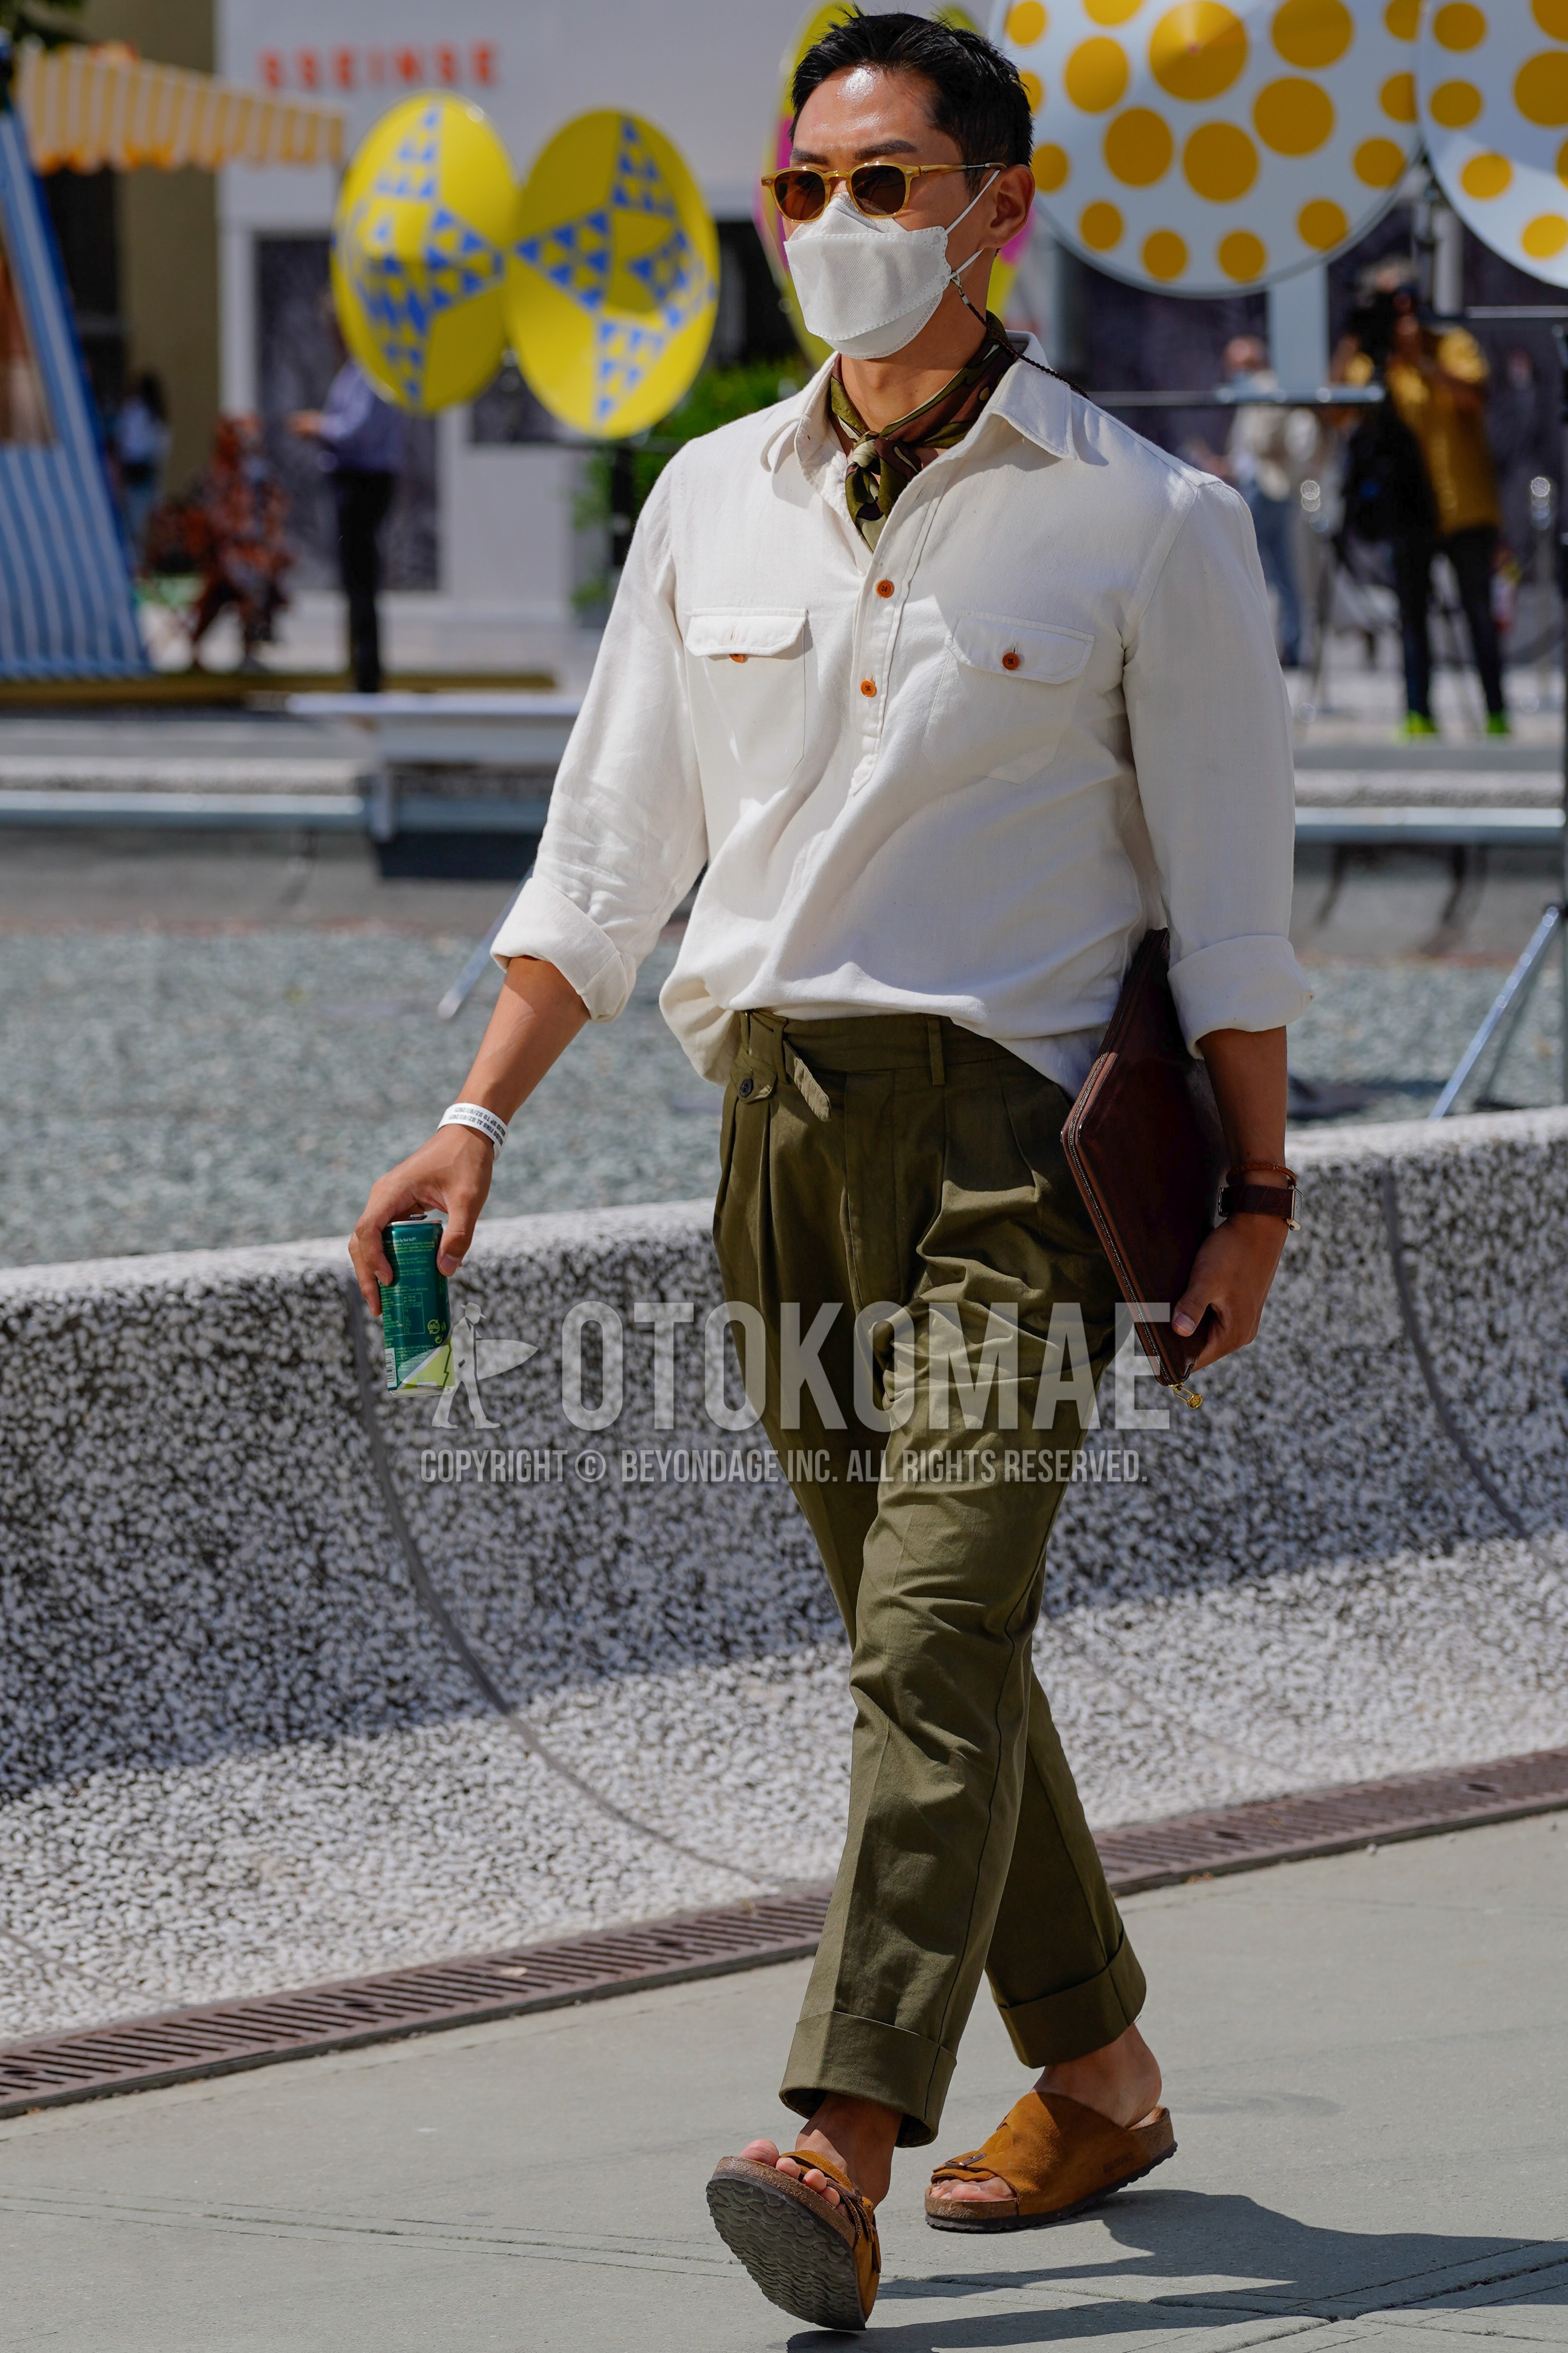 Men's spring summer outfit with brown tortoiseshell sunglasses, olive green plain bandana/neckerchief, white plain shirt, olive green plain slacks, brown leather sandals, brown plain clutch bag/second bag/drawstring bag.